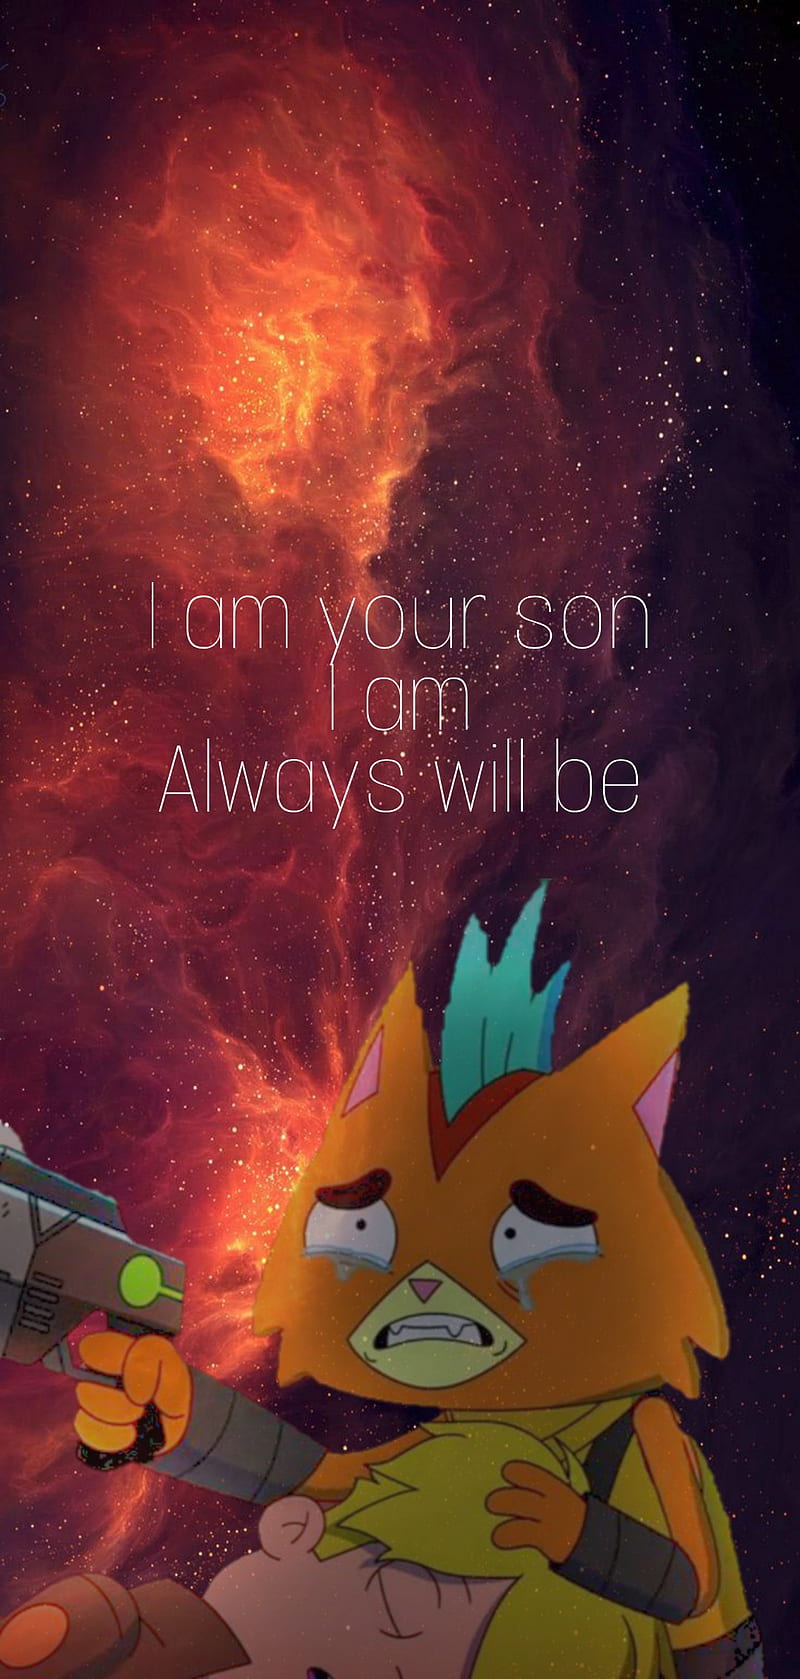 Sad final space lc, death, final space, gary, littlecato, netflix, quote, sad, series, show, space, HD phone wallpaper